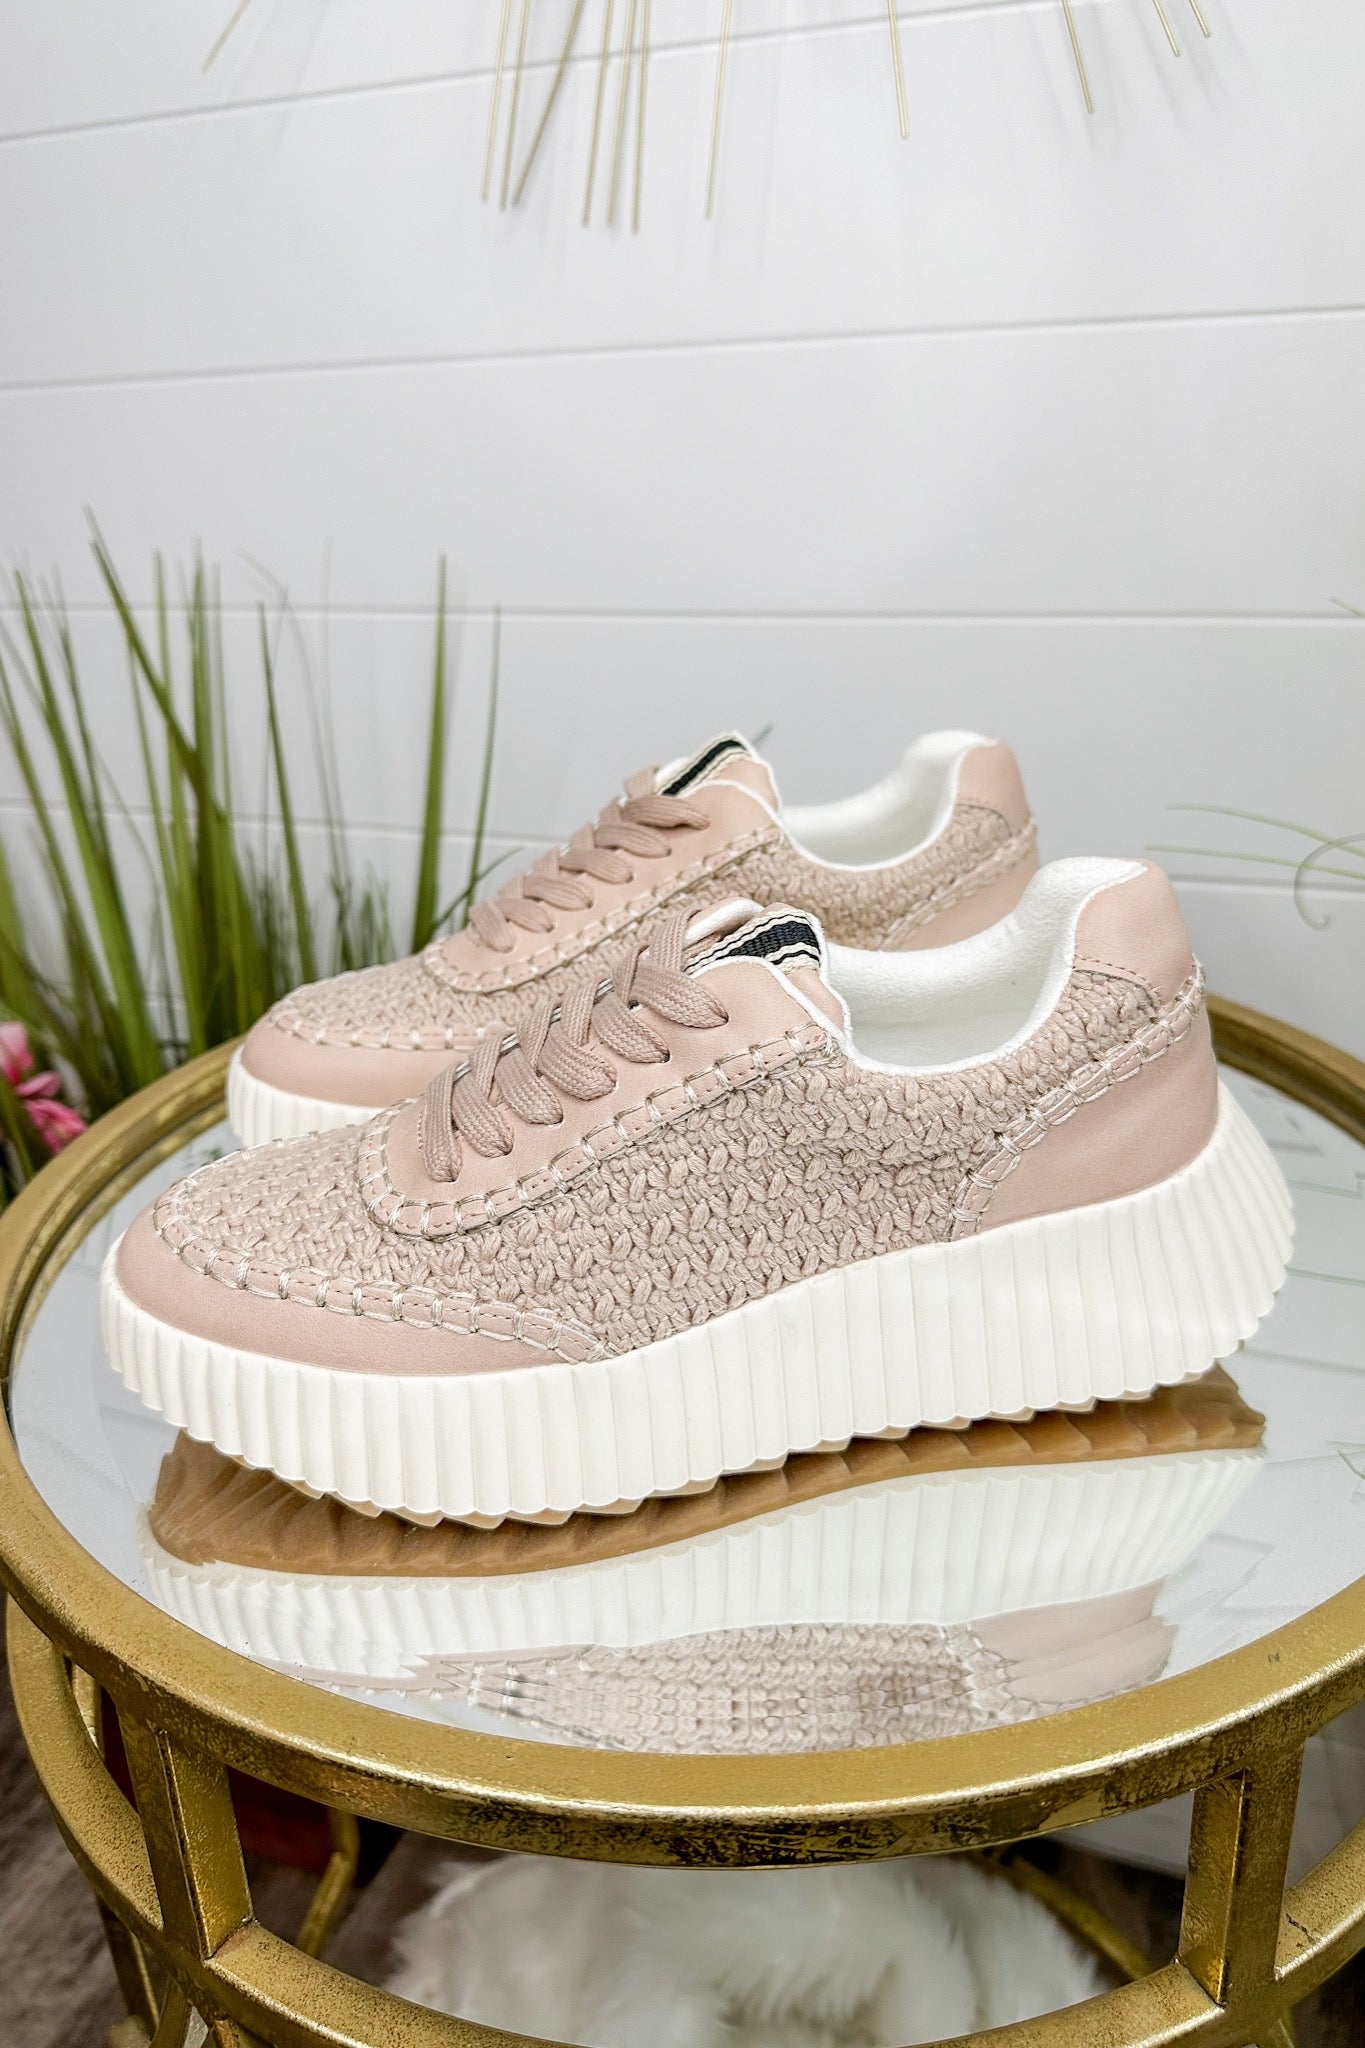 The Selina Woven Sneaker in Mauve by ShuShop